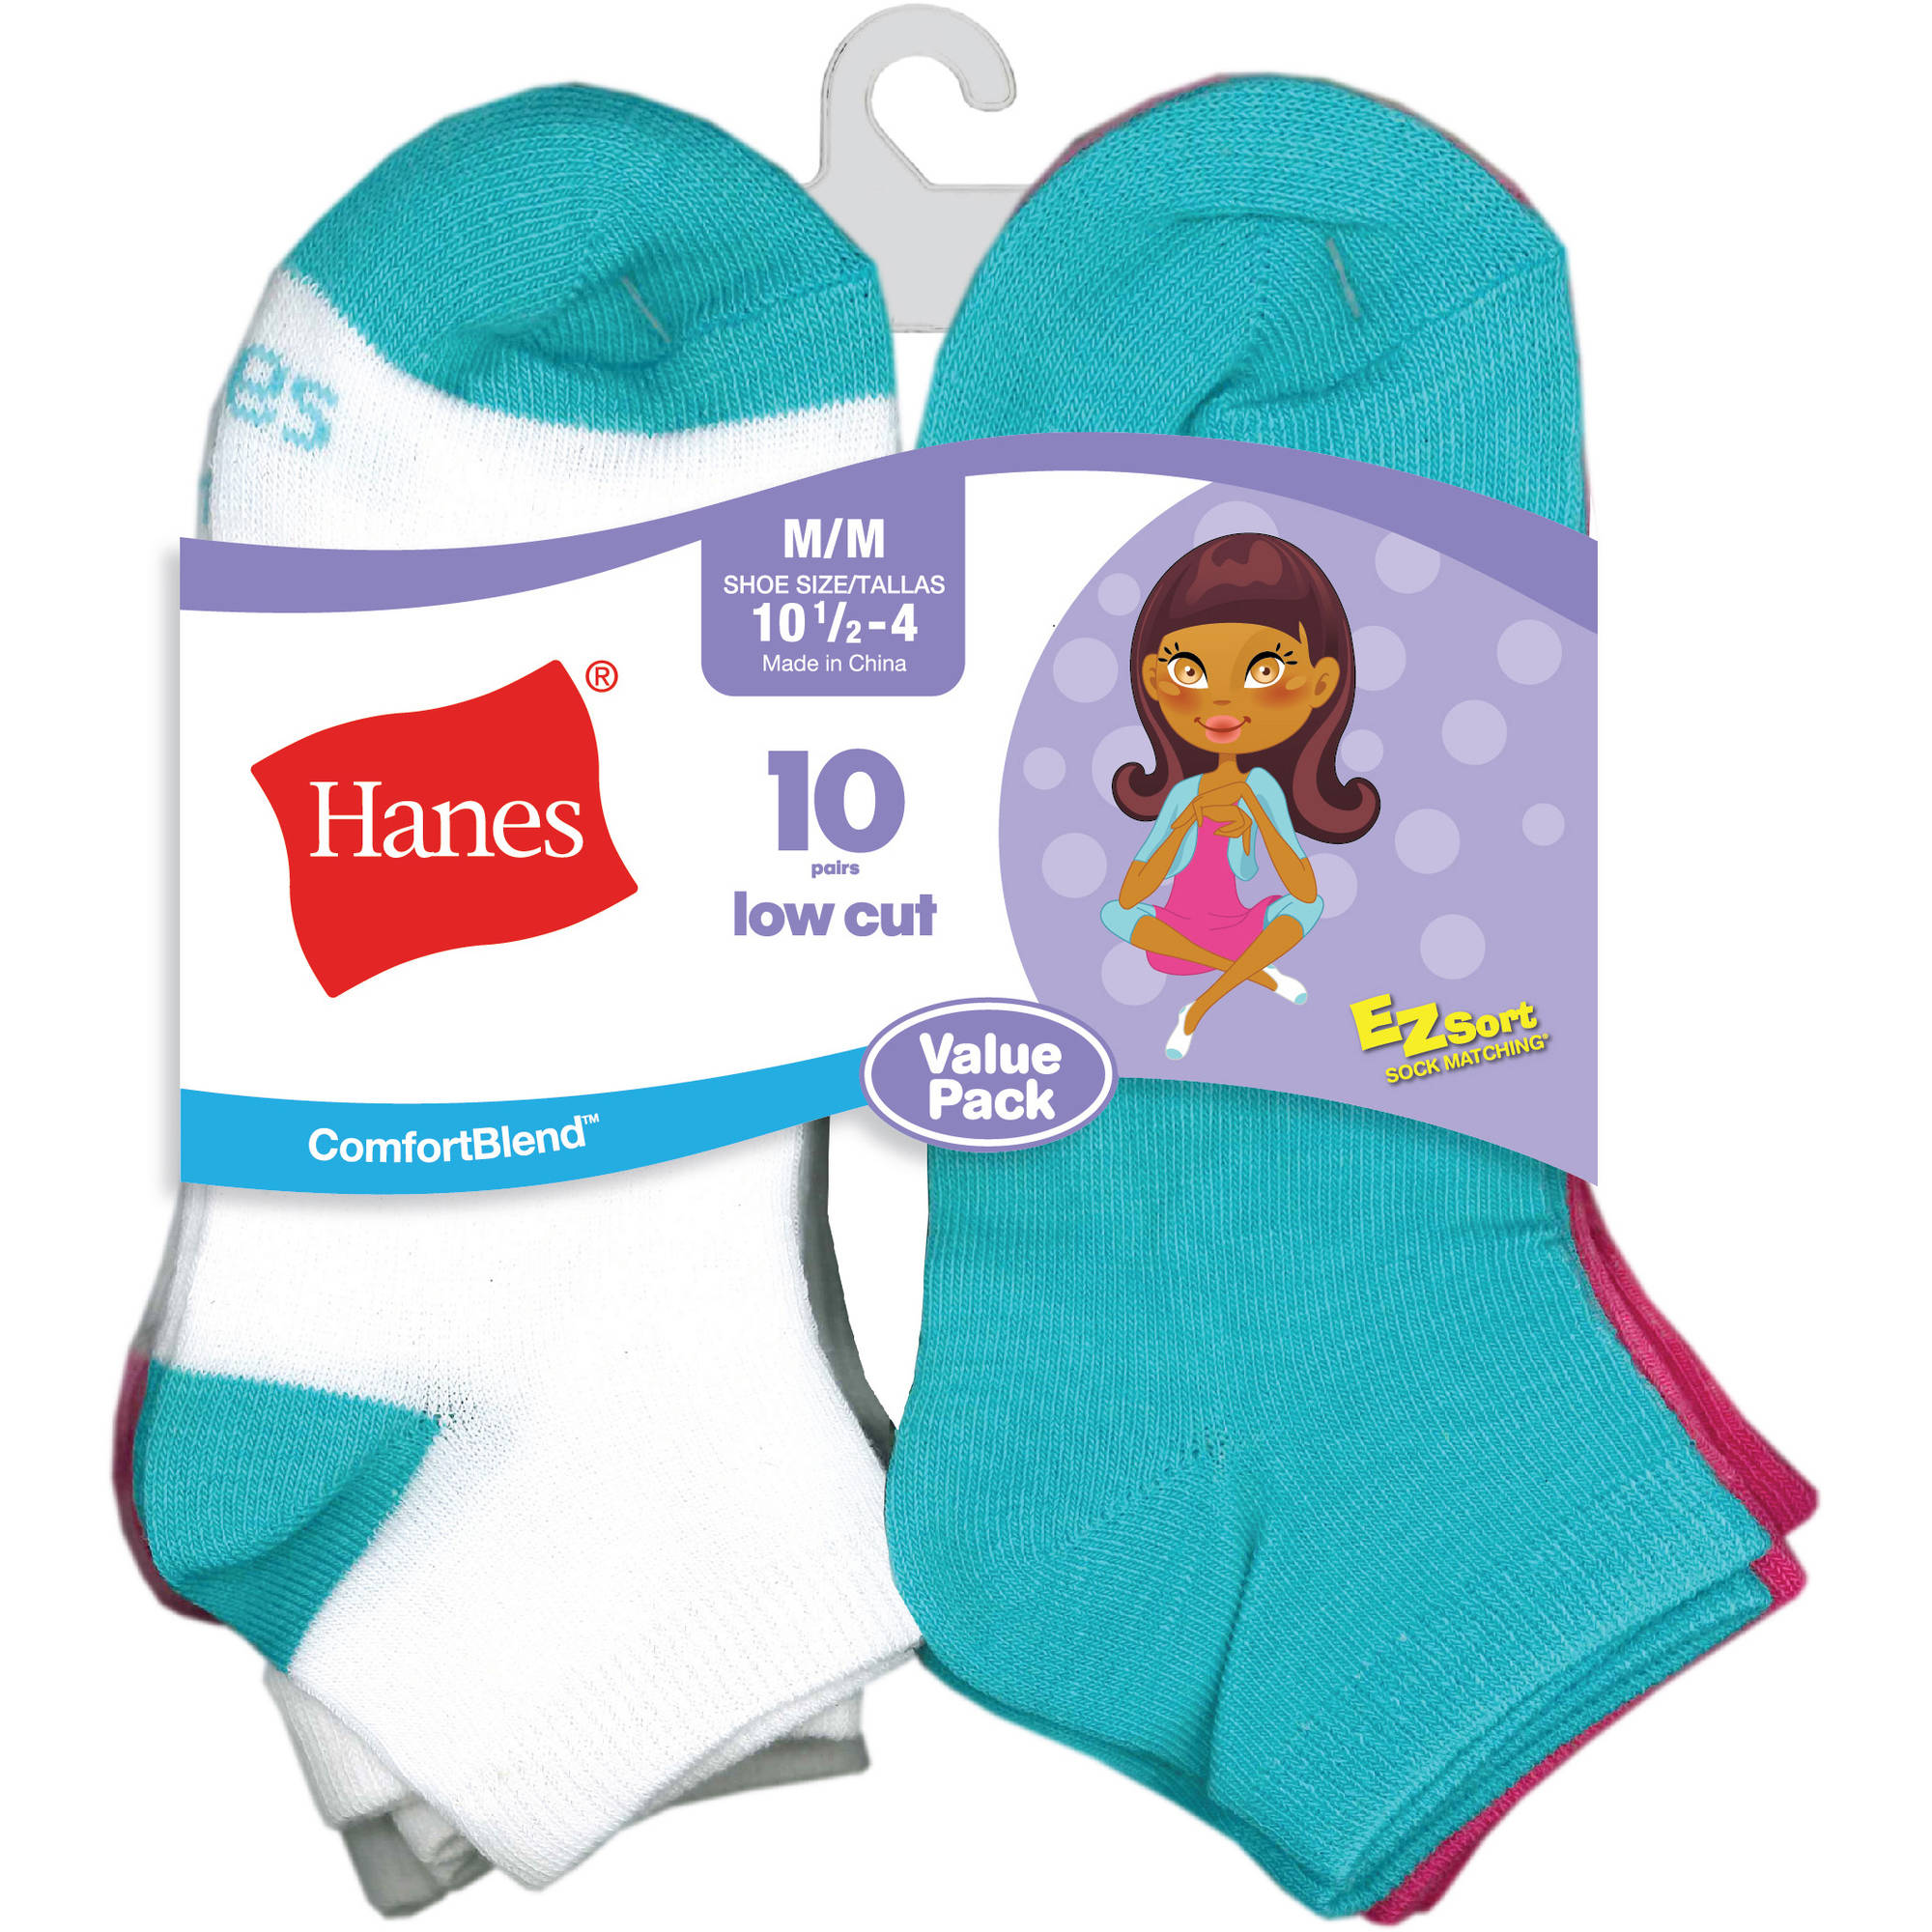 Hanes Girls Socks, 10 Pack Low Cut, Sizes S - L - image 4 of 4